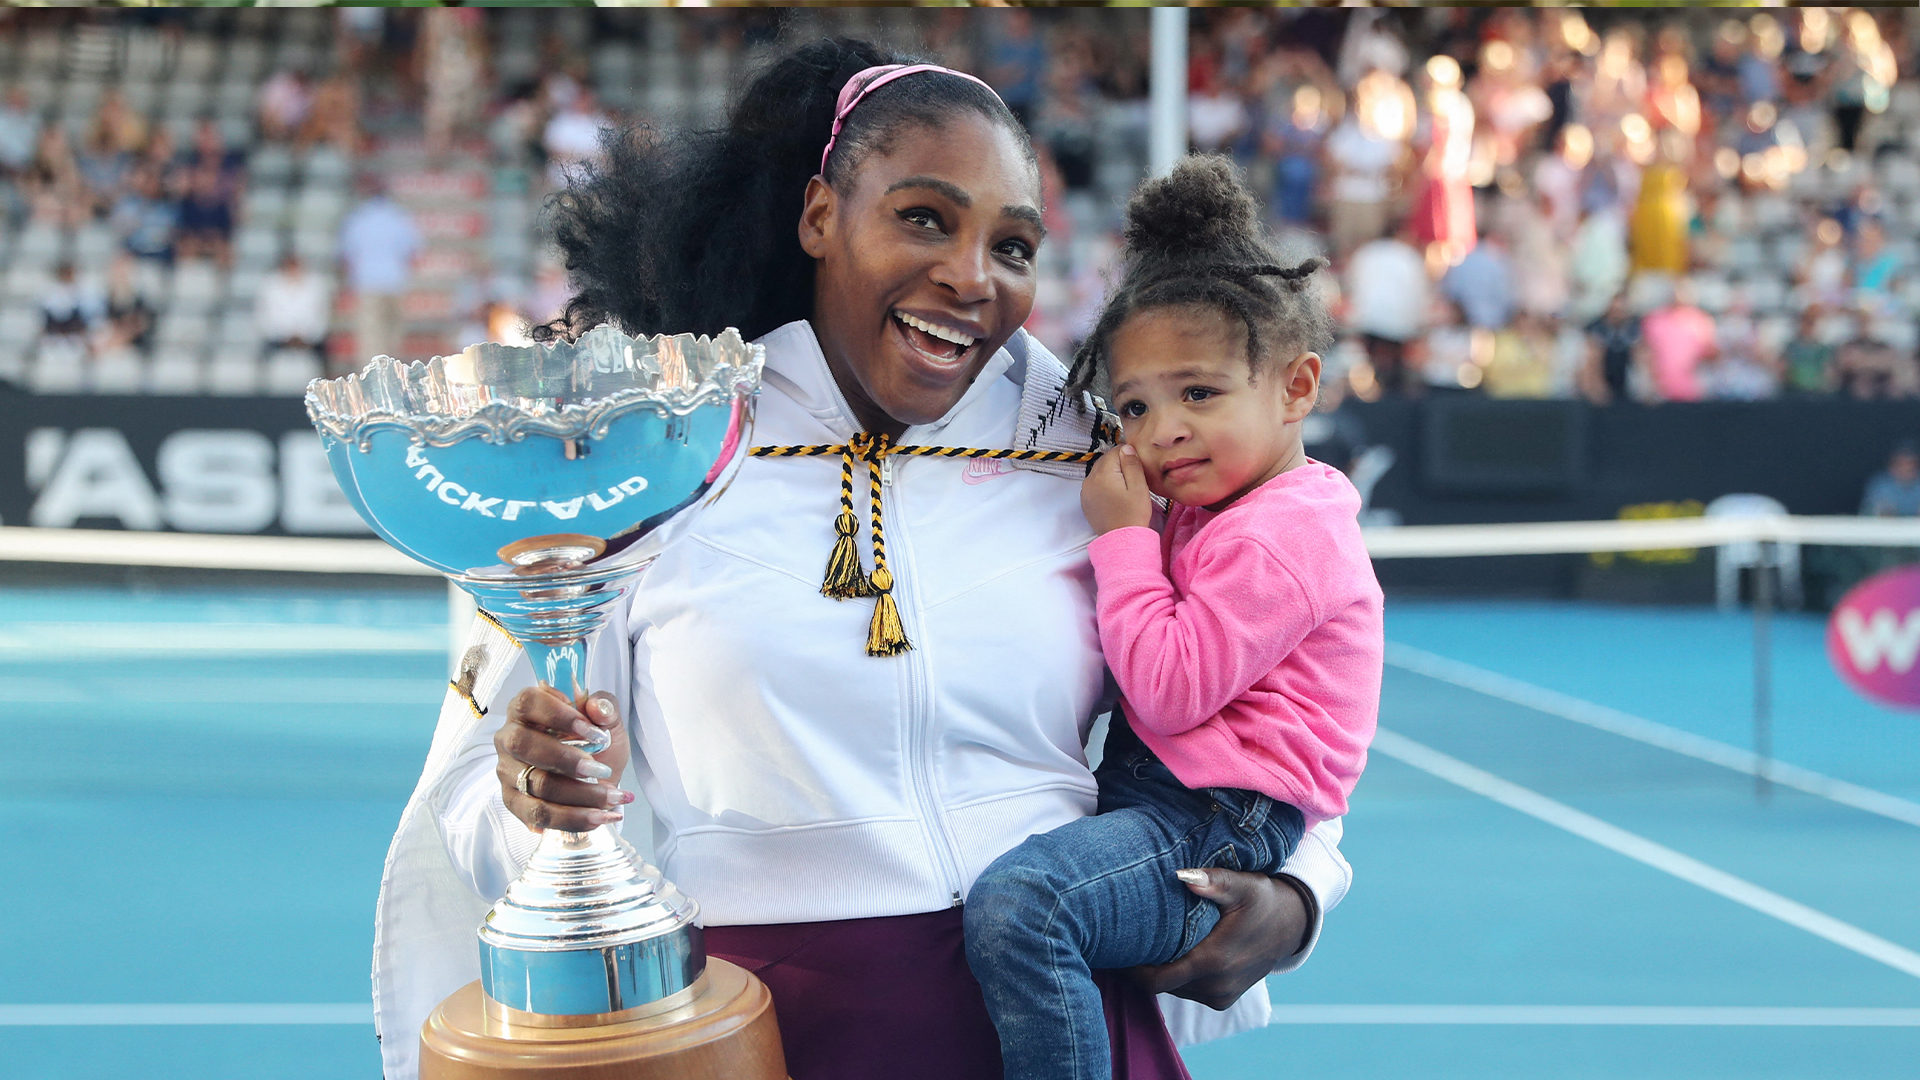 How Many Pro Sports Teams Does Serena Williams' Daughters Own?